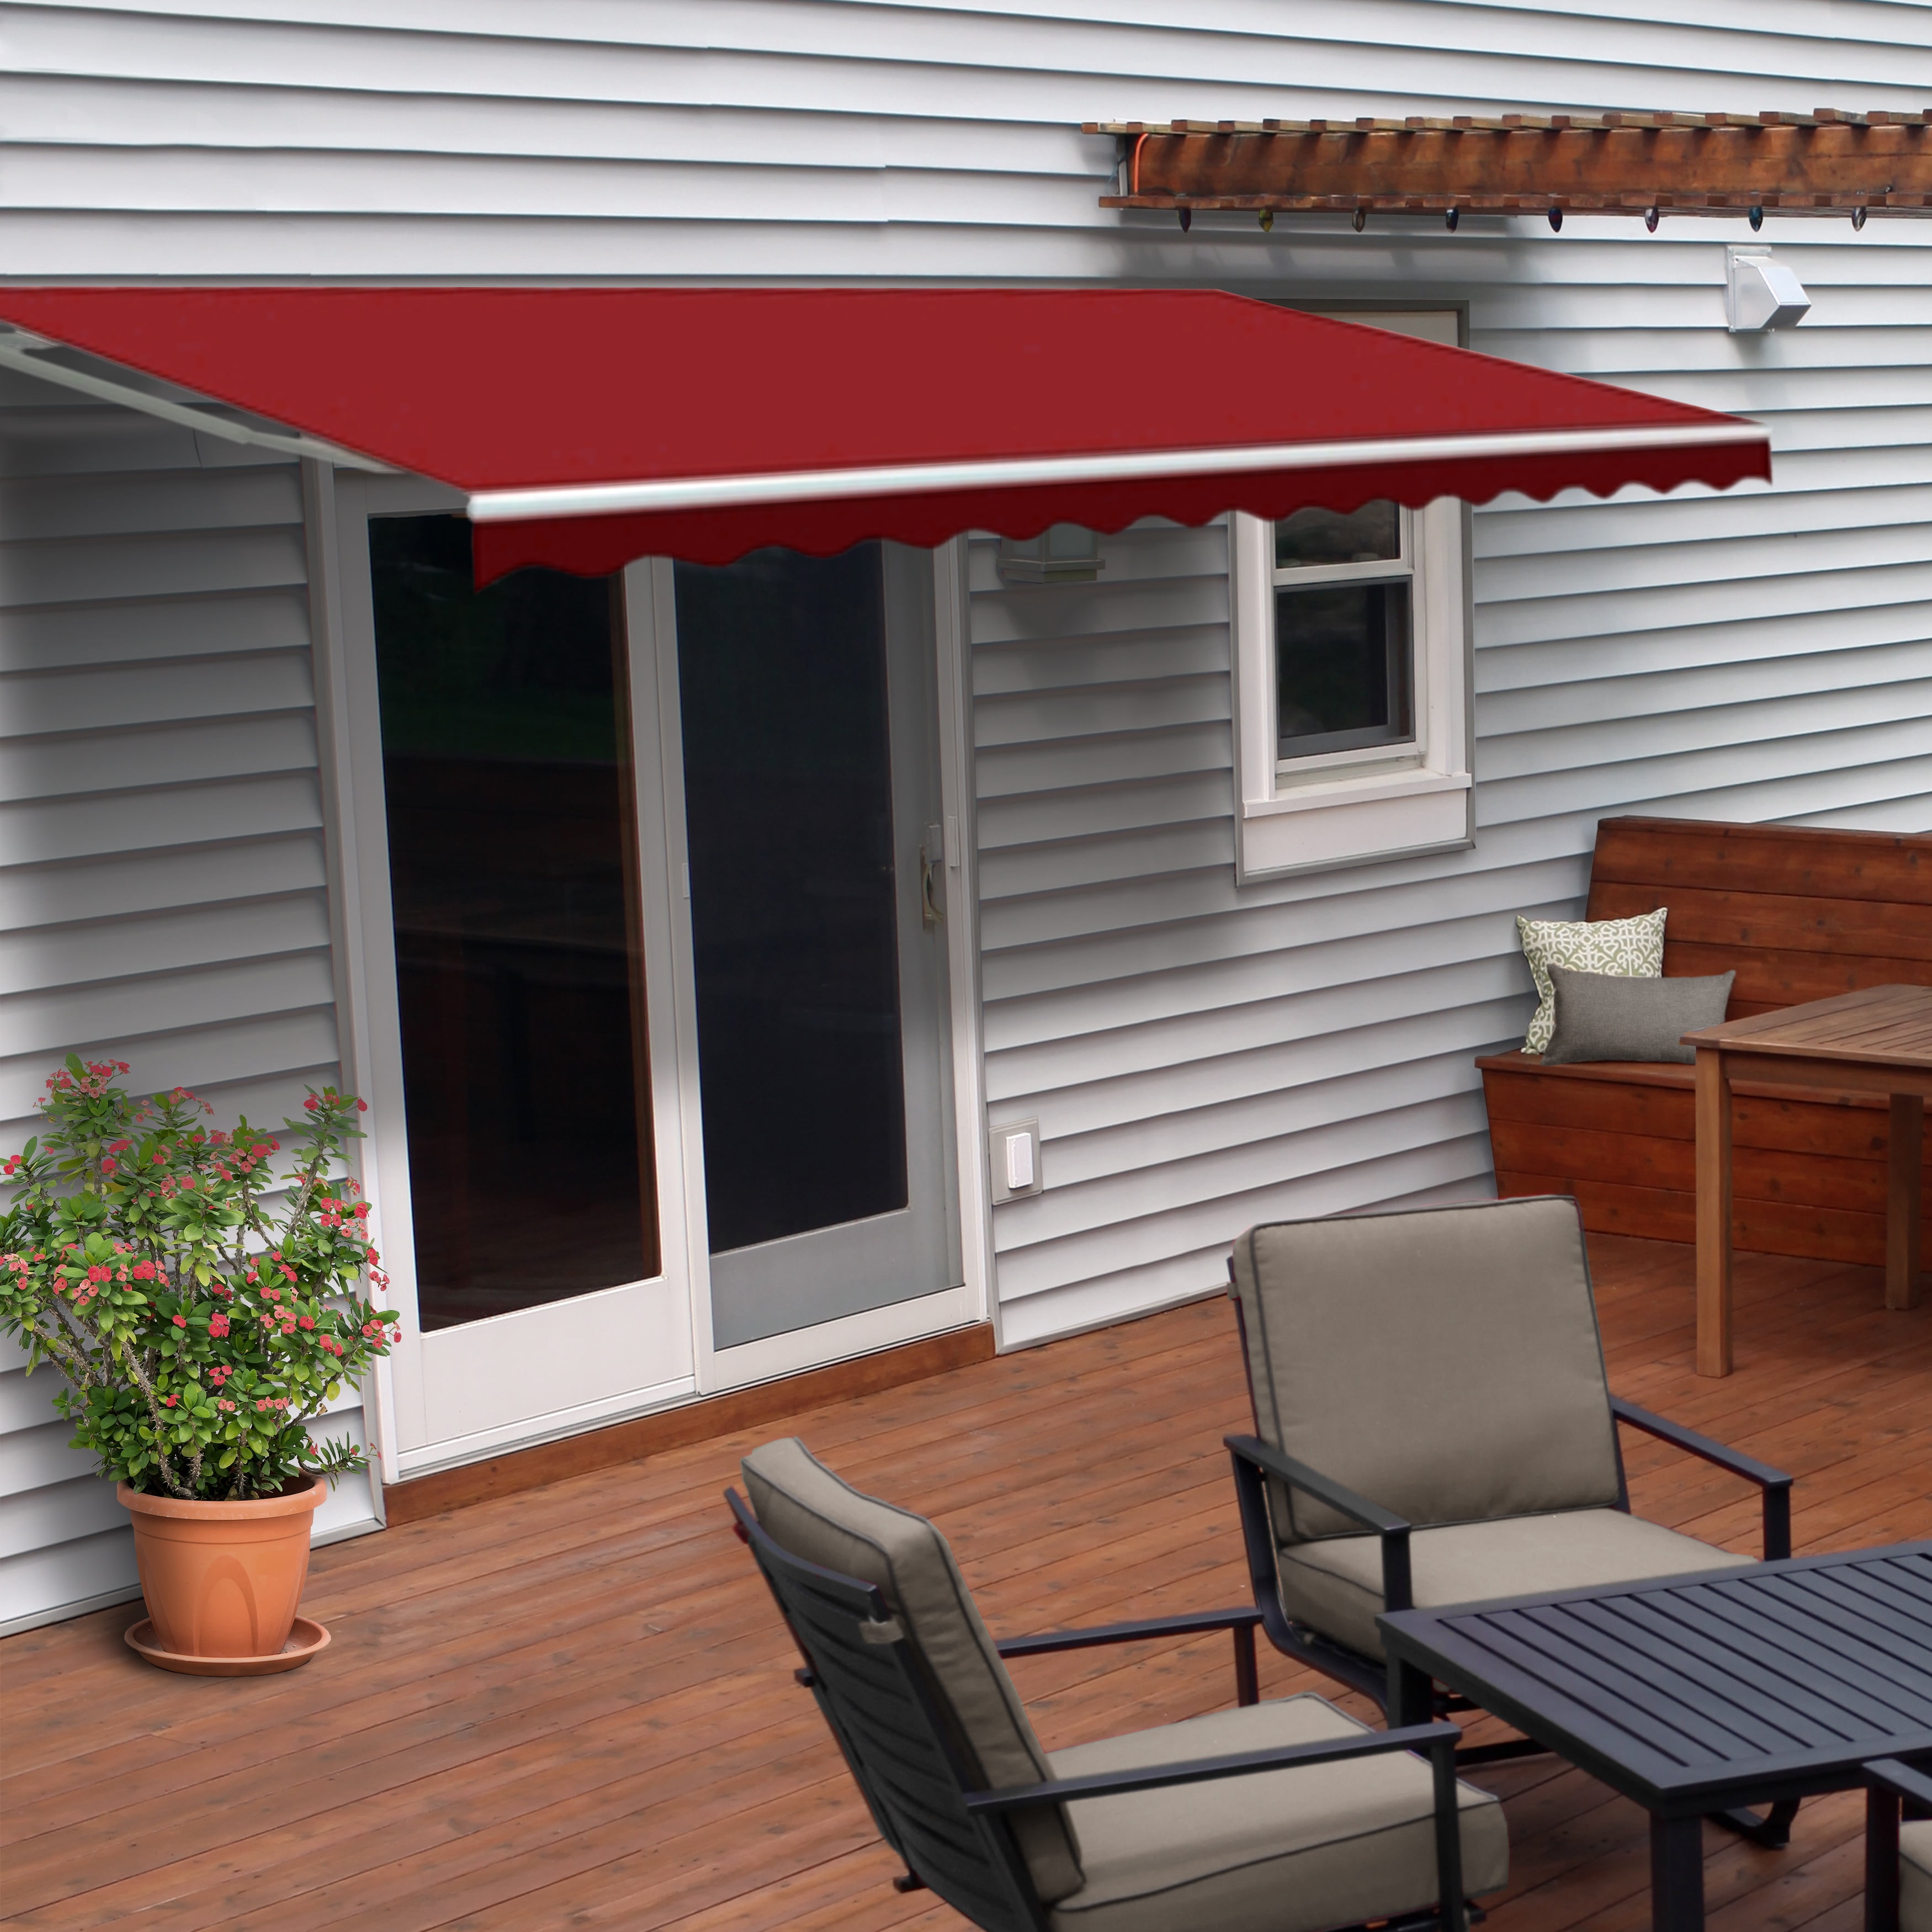 Deck Awning 13 X 8 12 X 10 Manual Retractable Sun Shade Patio Porch Wine Red USA 